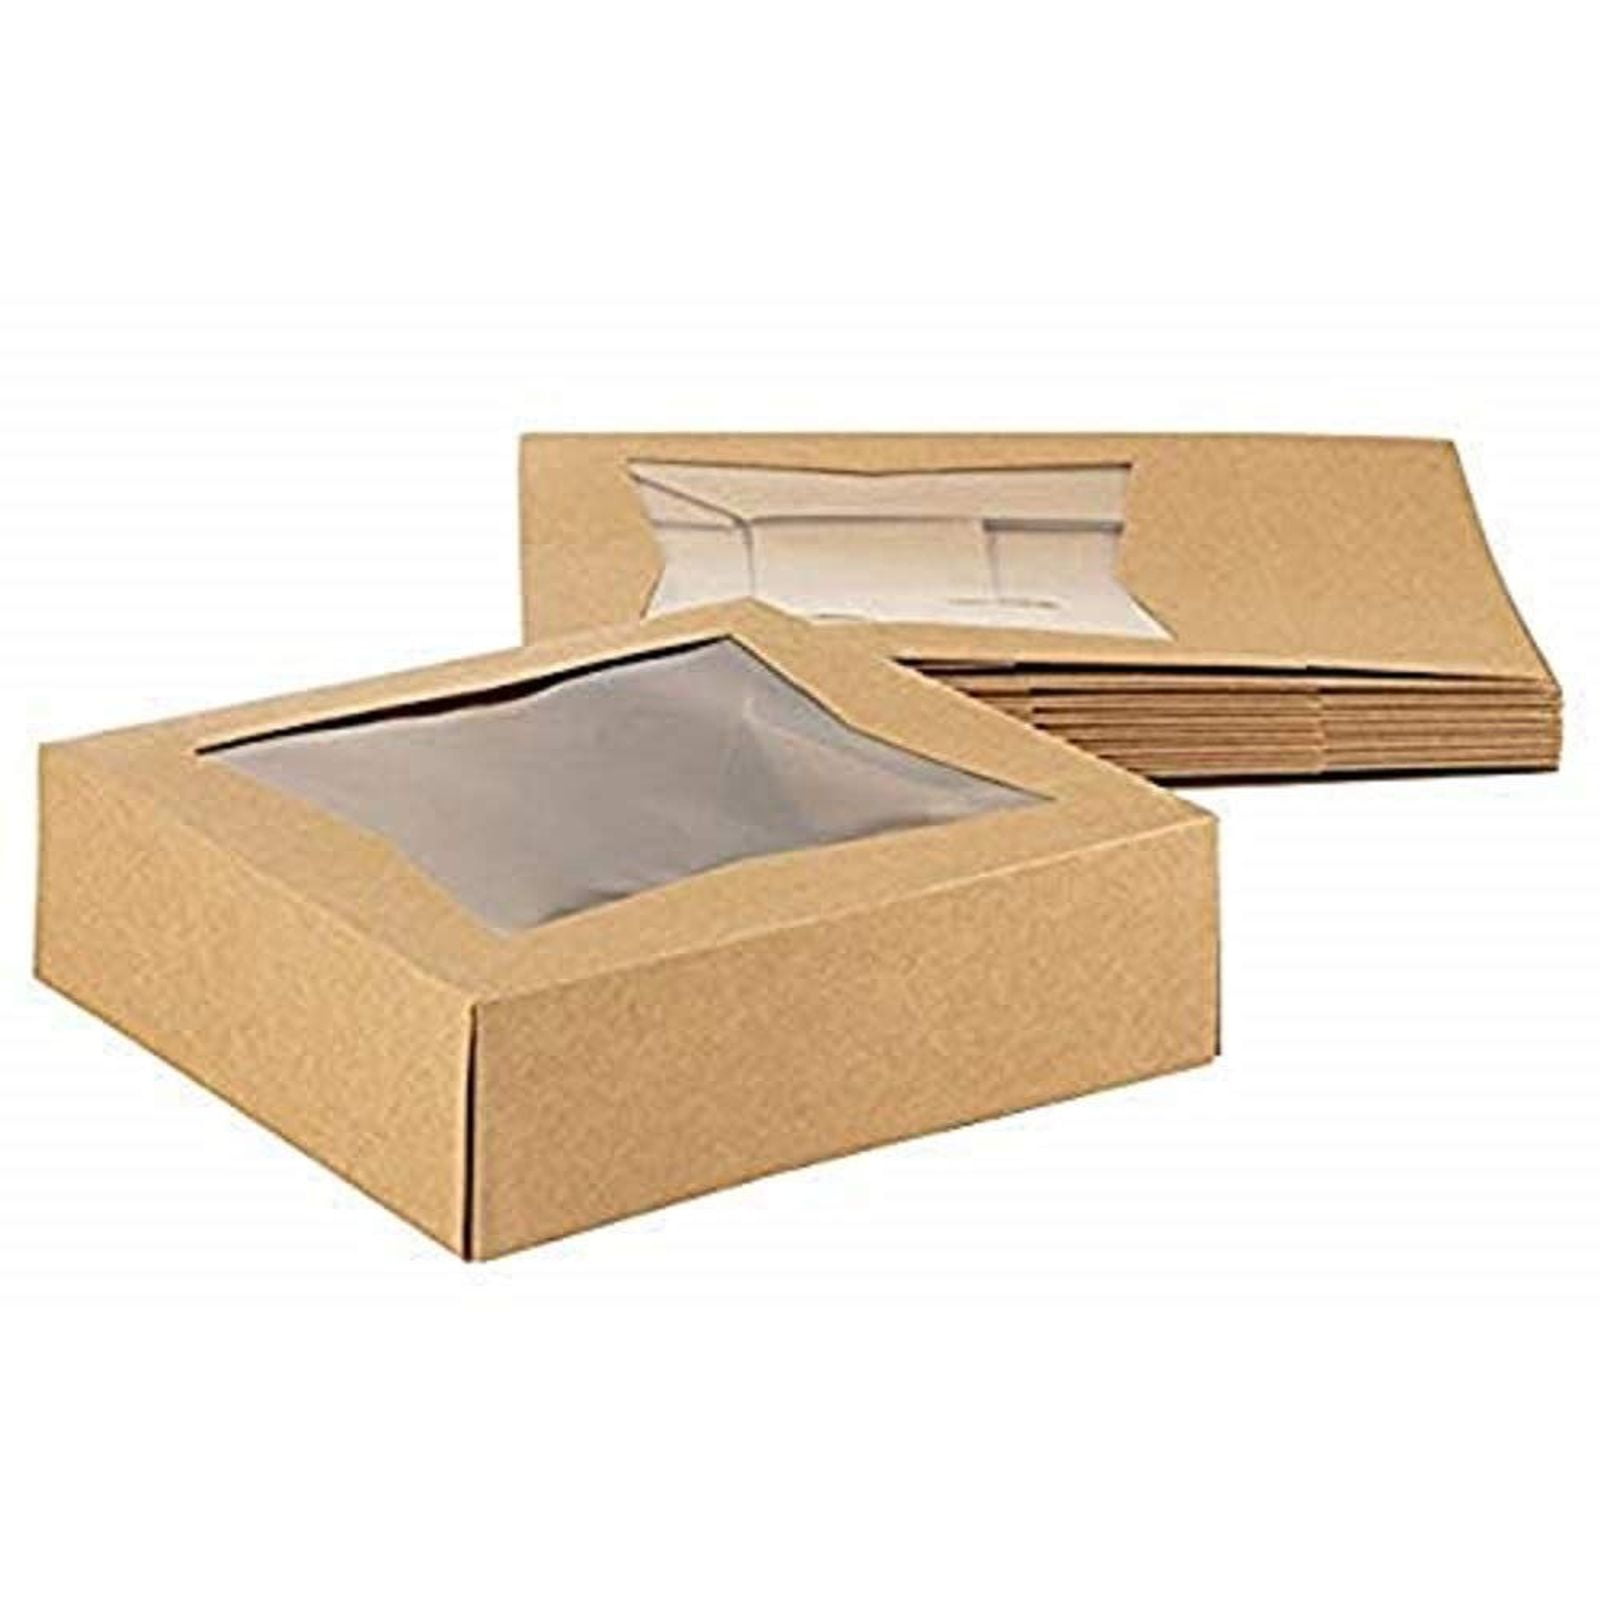 COOKIE BOX 10 KRAFT 8 x 8 INCH BOXES GIFT BOX CHOCOLATES BISCUITS